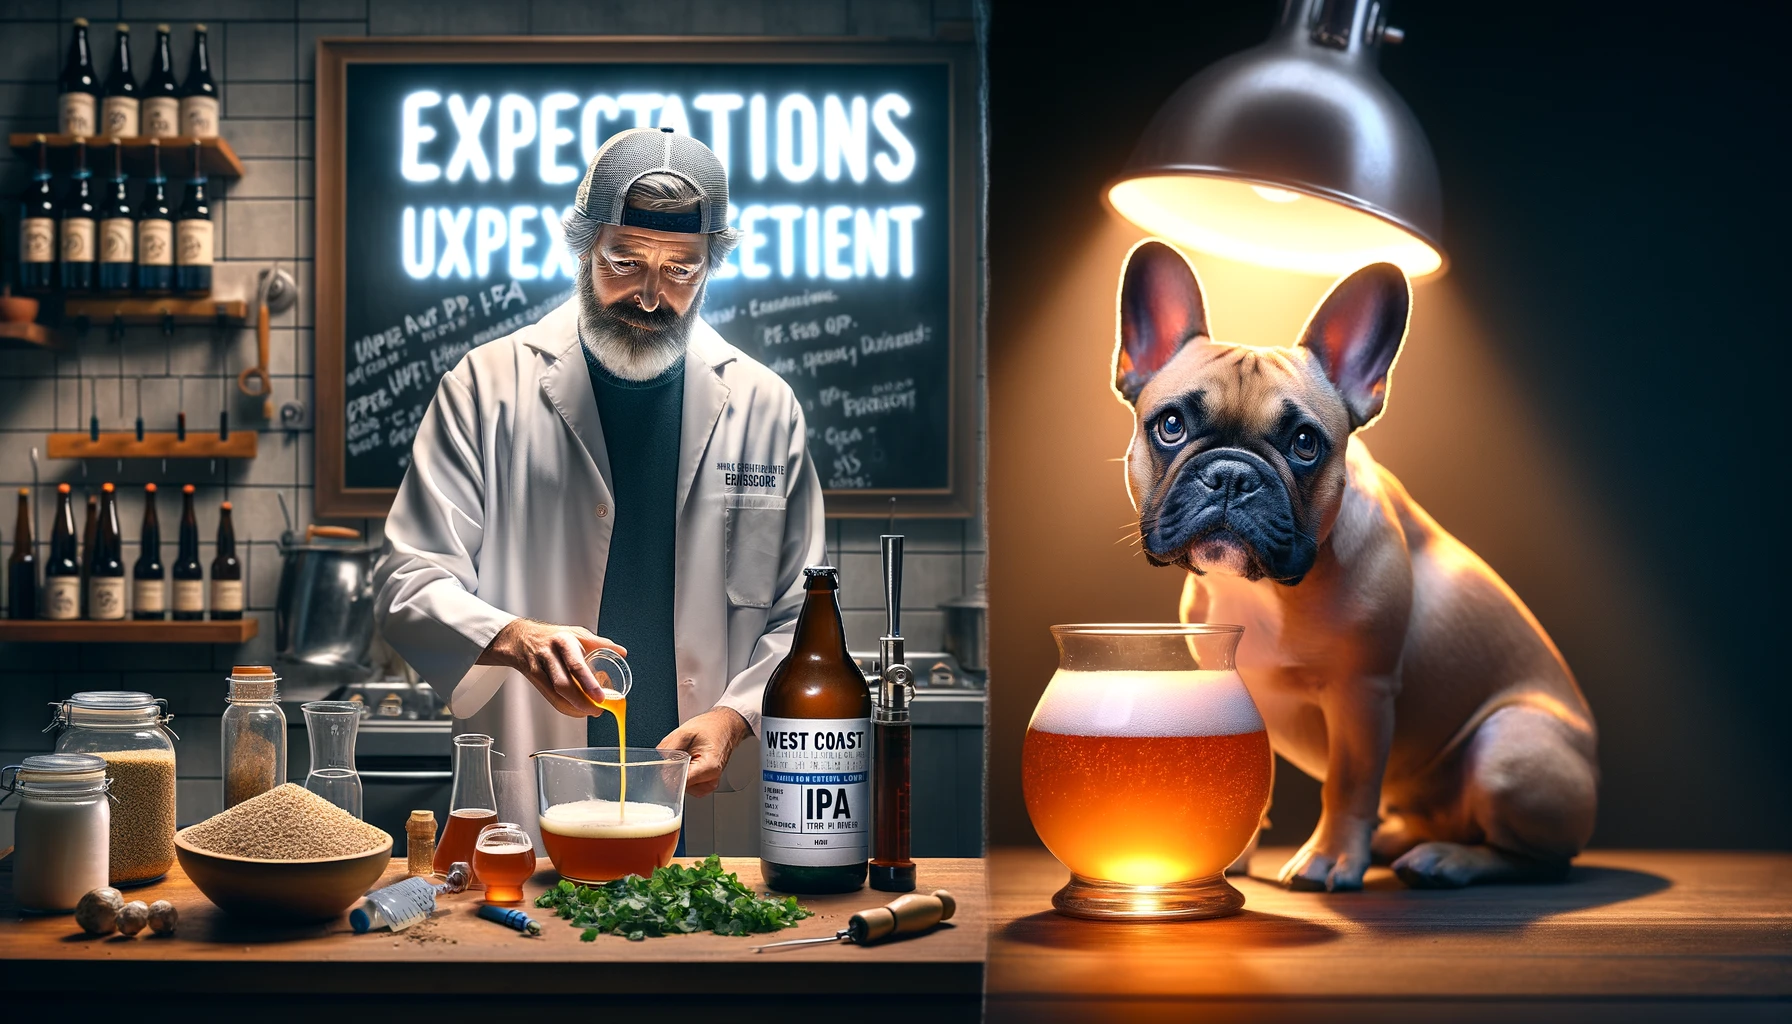 A visually engaging image showing a split scene_ on the left side, the ingredients and setup for a New England IPA with the word 'Expectations' floati